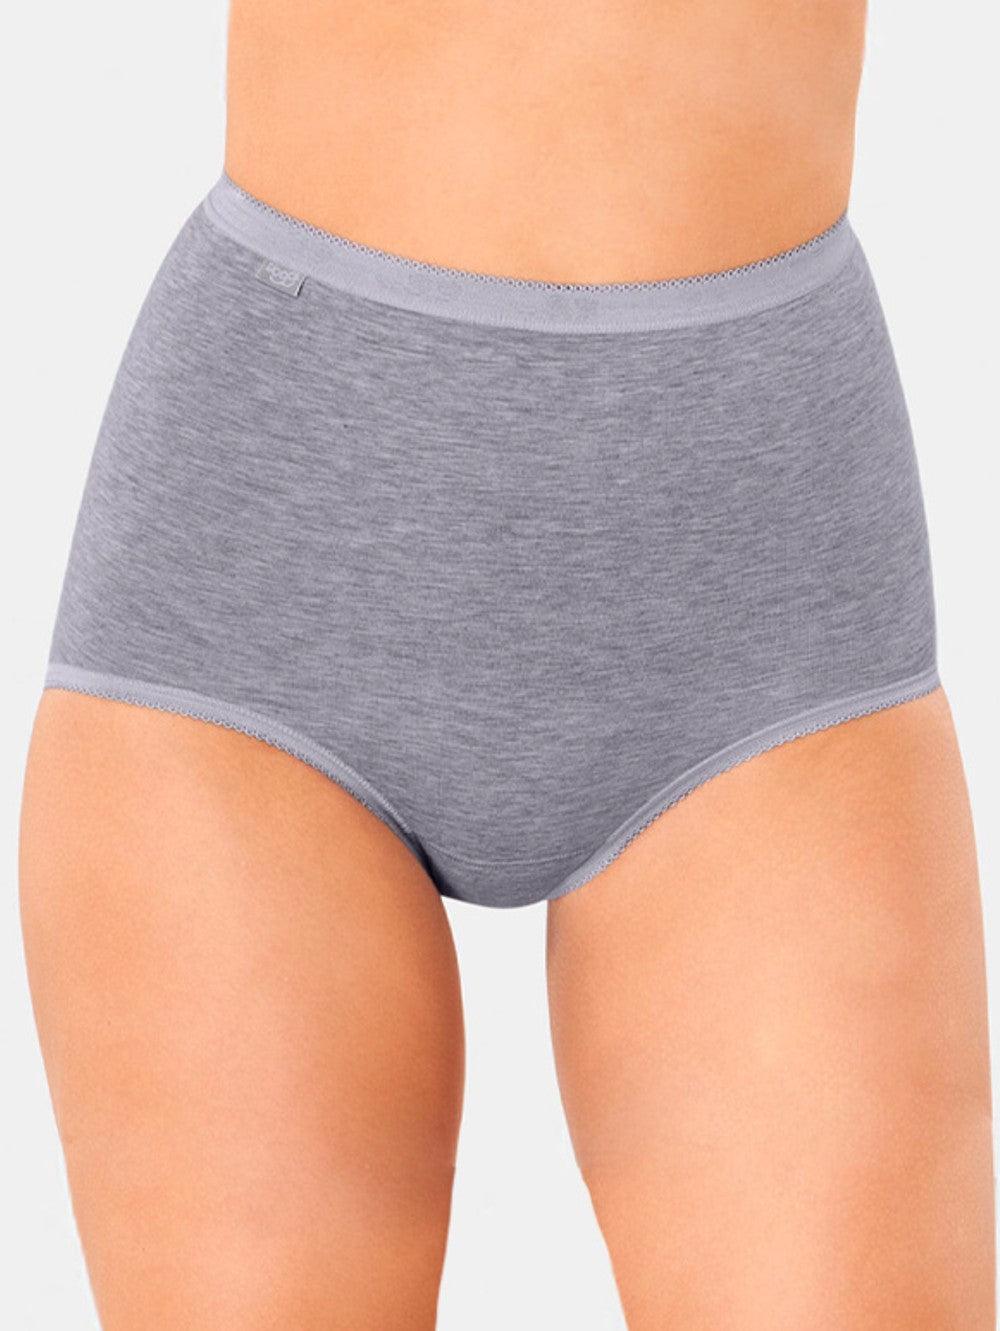 Can you tumble dry Sloggi Maxi Brief knickers? – Carr & Westley